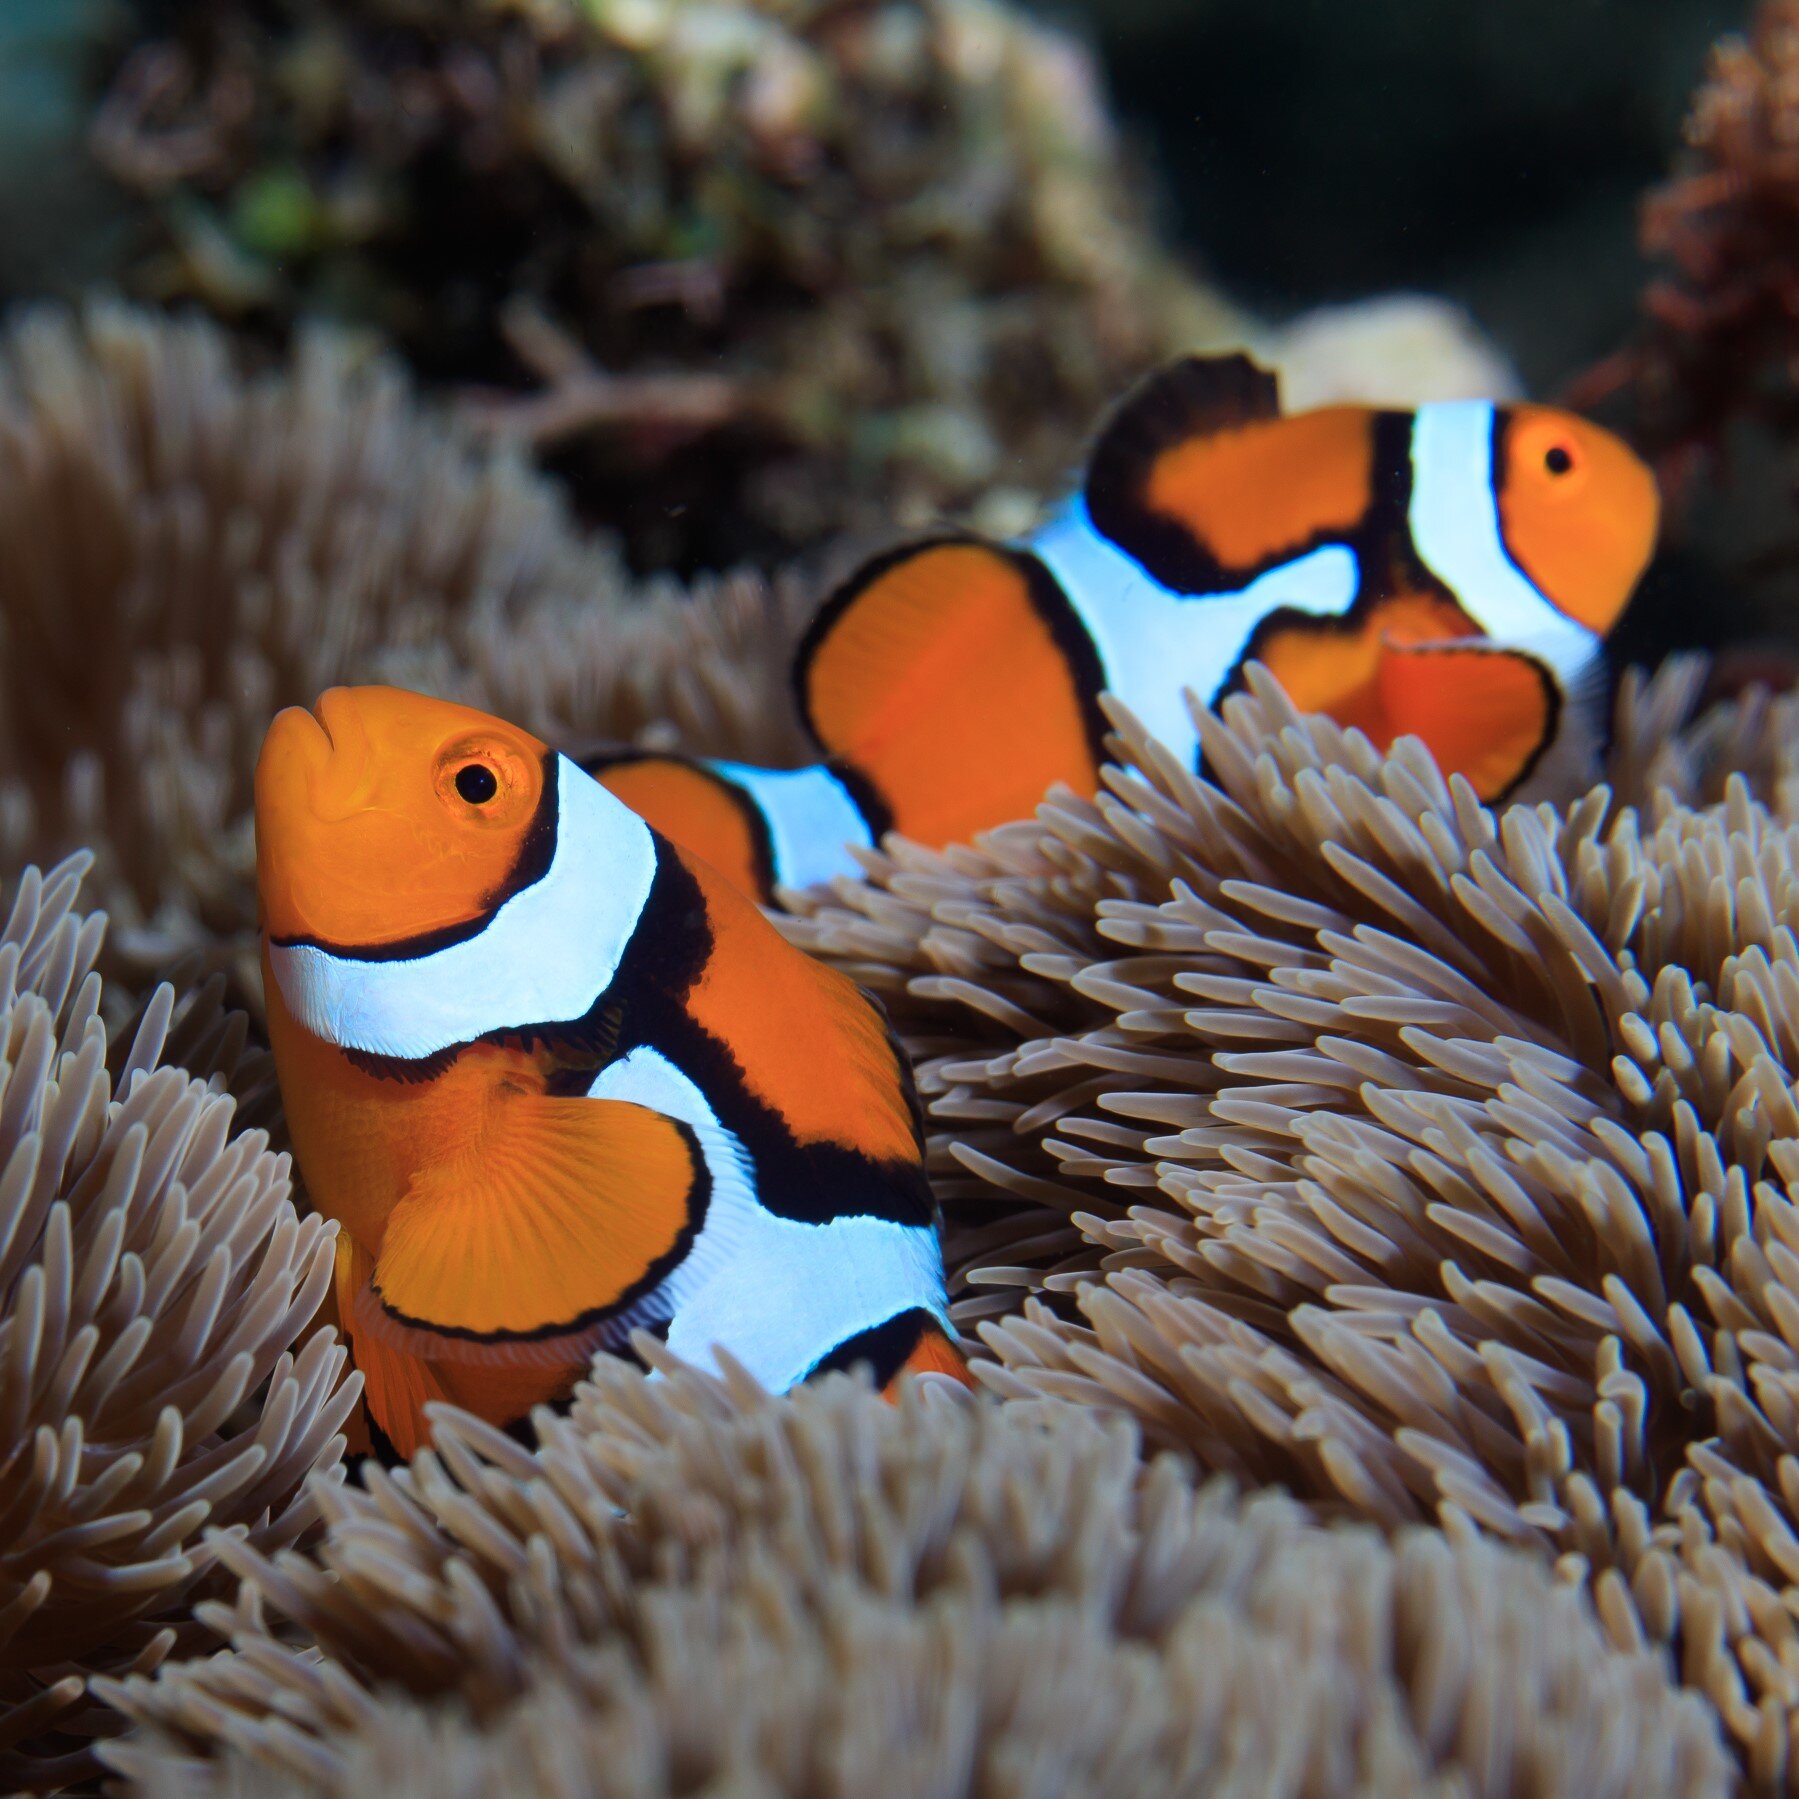 Distinctive white stripes in clownfish form at different rates depending on their sea anemone hosts